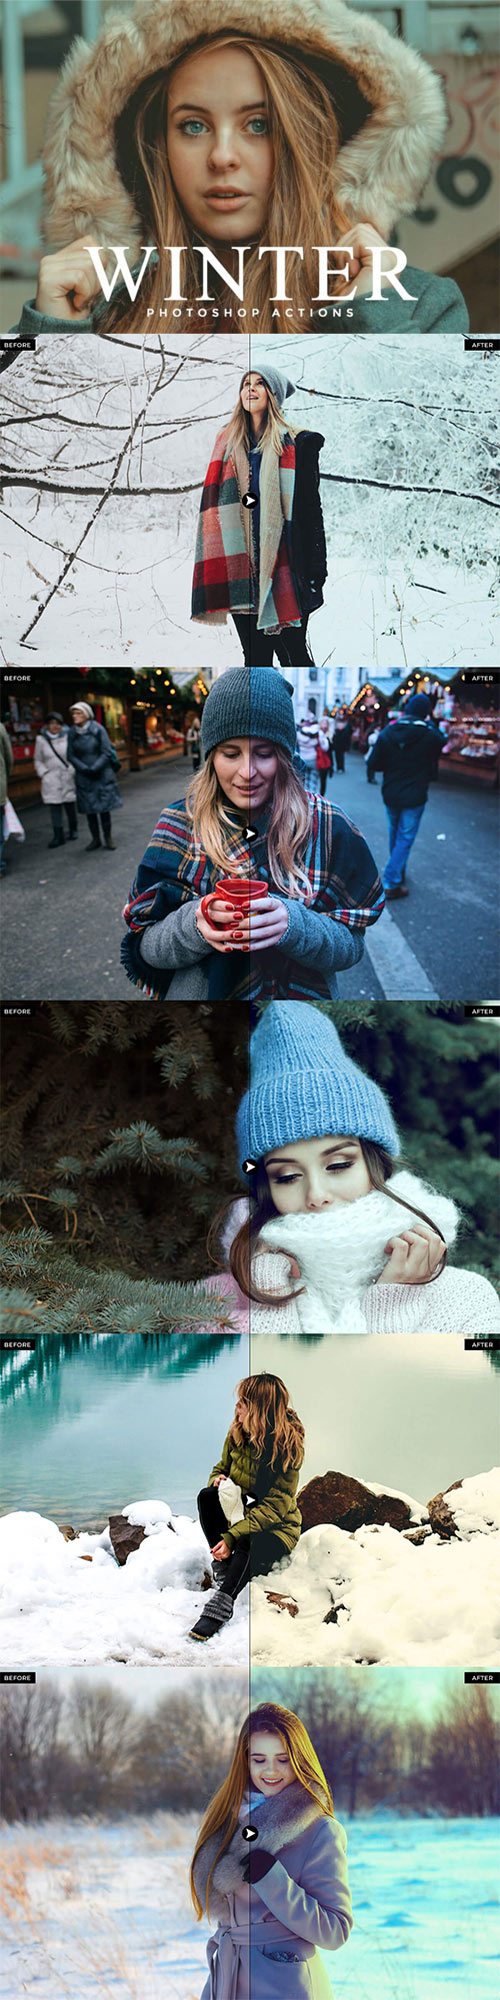 50 Winter Photoshop Actions